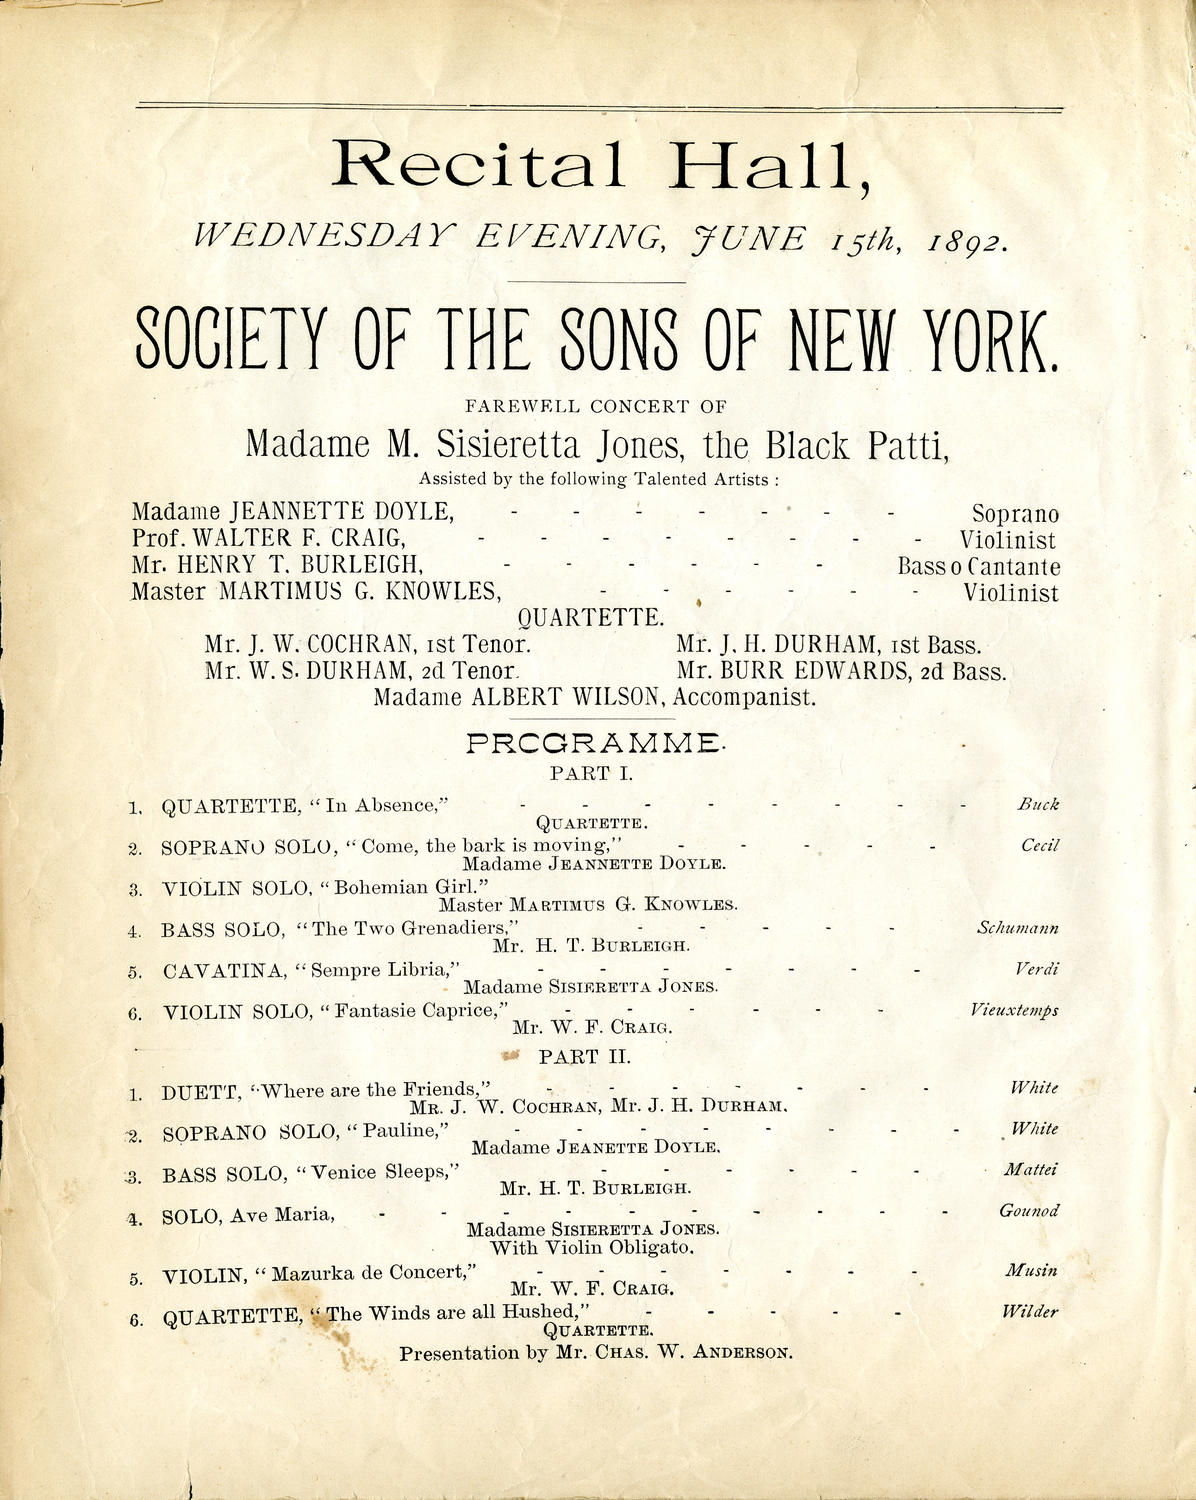 Society of the Sons of New York: Farewell Concert of Sisieretta Jones, the Black Patti, June 15, 1892, program page 1